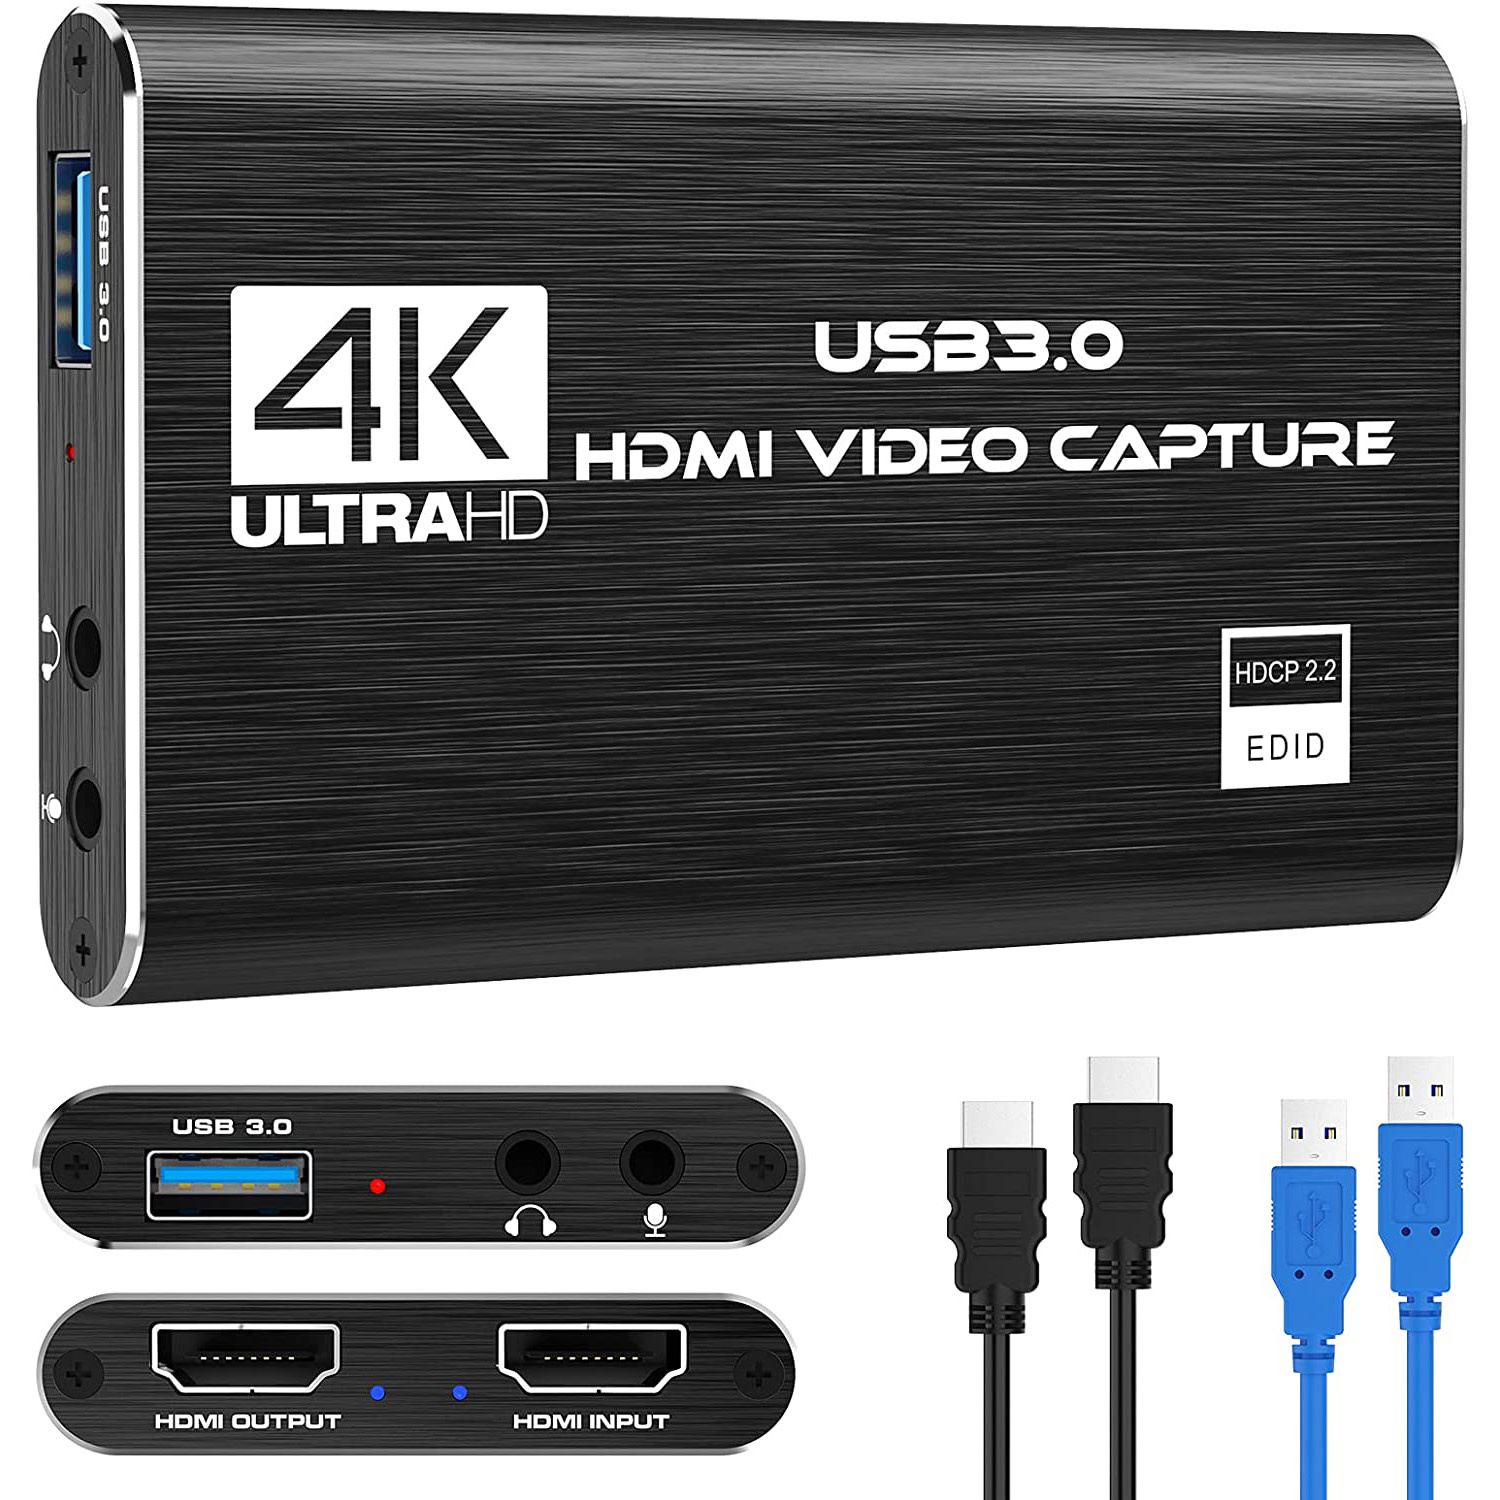 Cryo-PC 4K Video Capture USB 3.0 HDMI Video Capture Device, Full HD 1080P for Game Recording, Live Streaming Broadcasting - NWCA Inc.